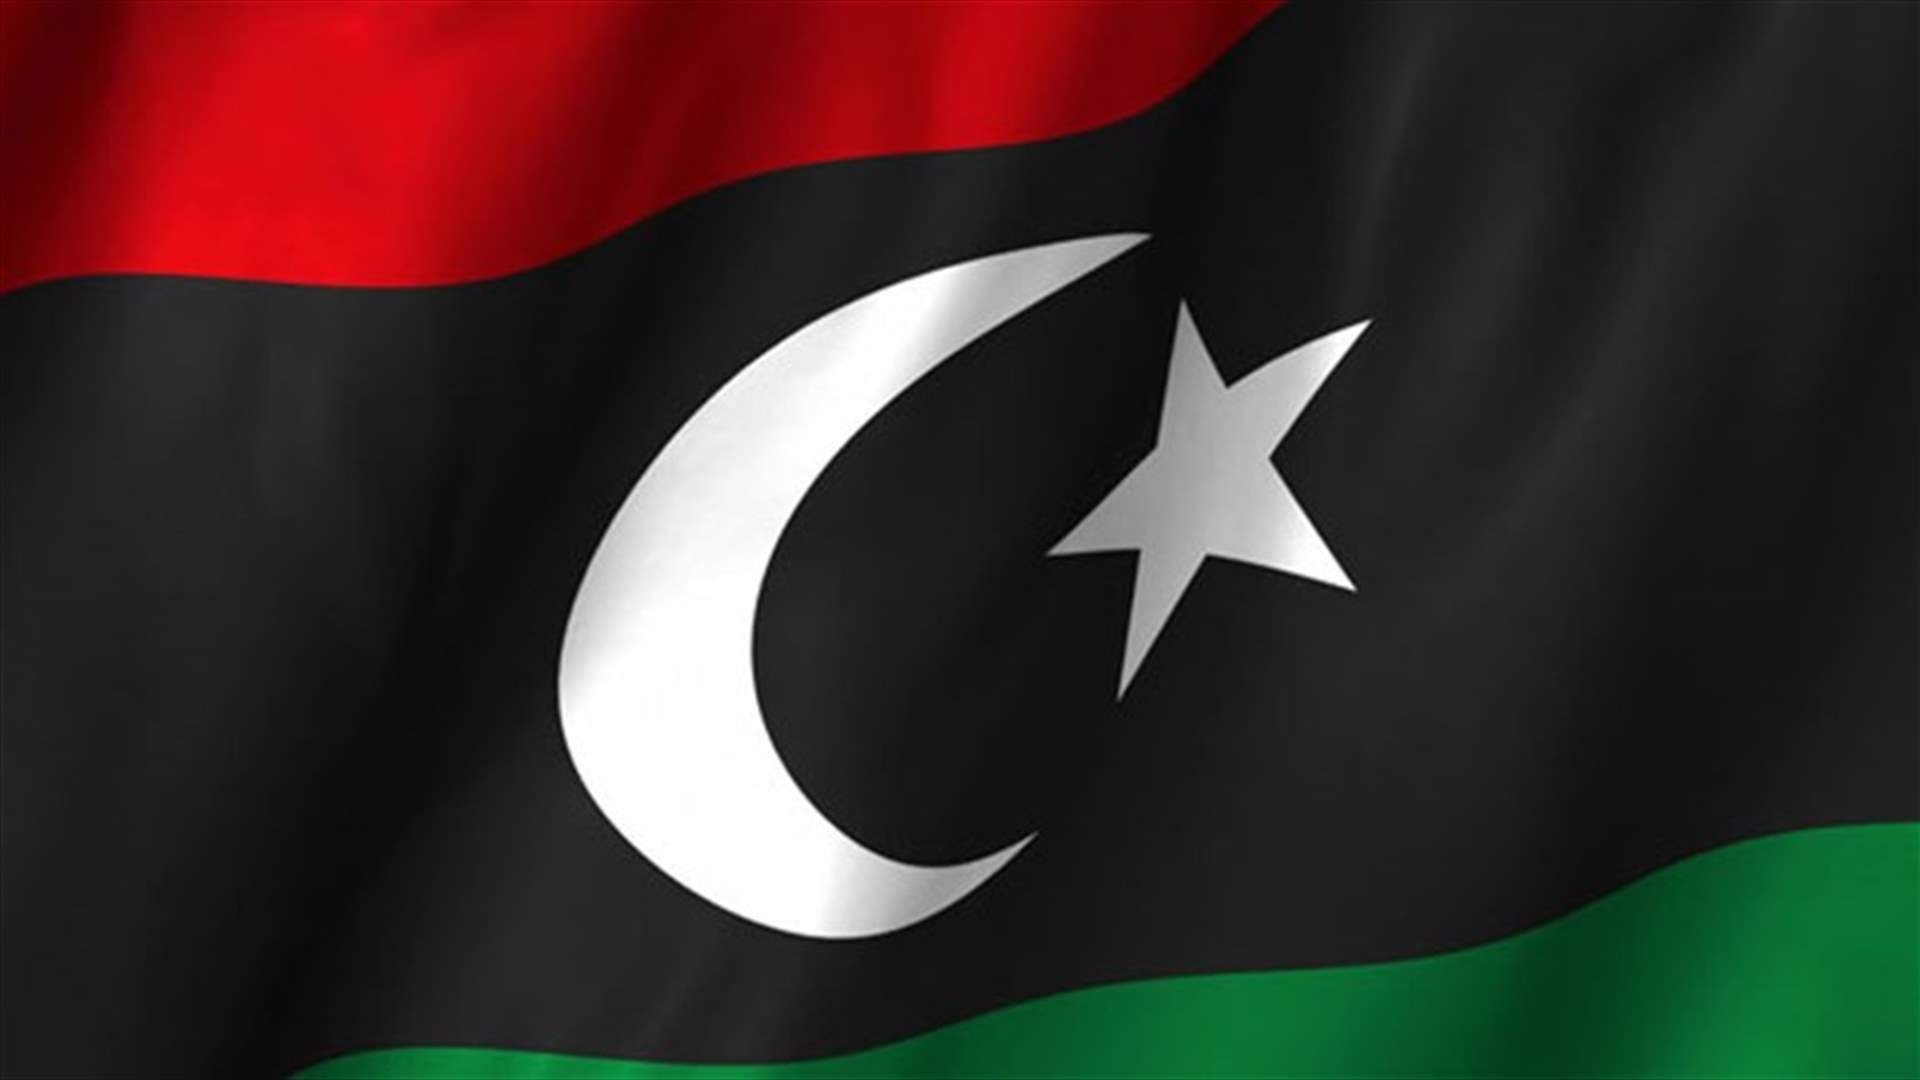 Libya military intervention may worsen situation-Italy minister